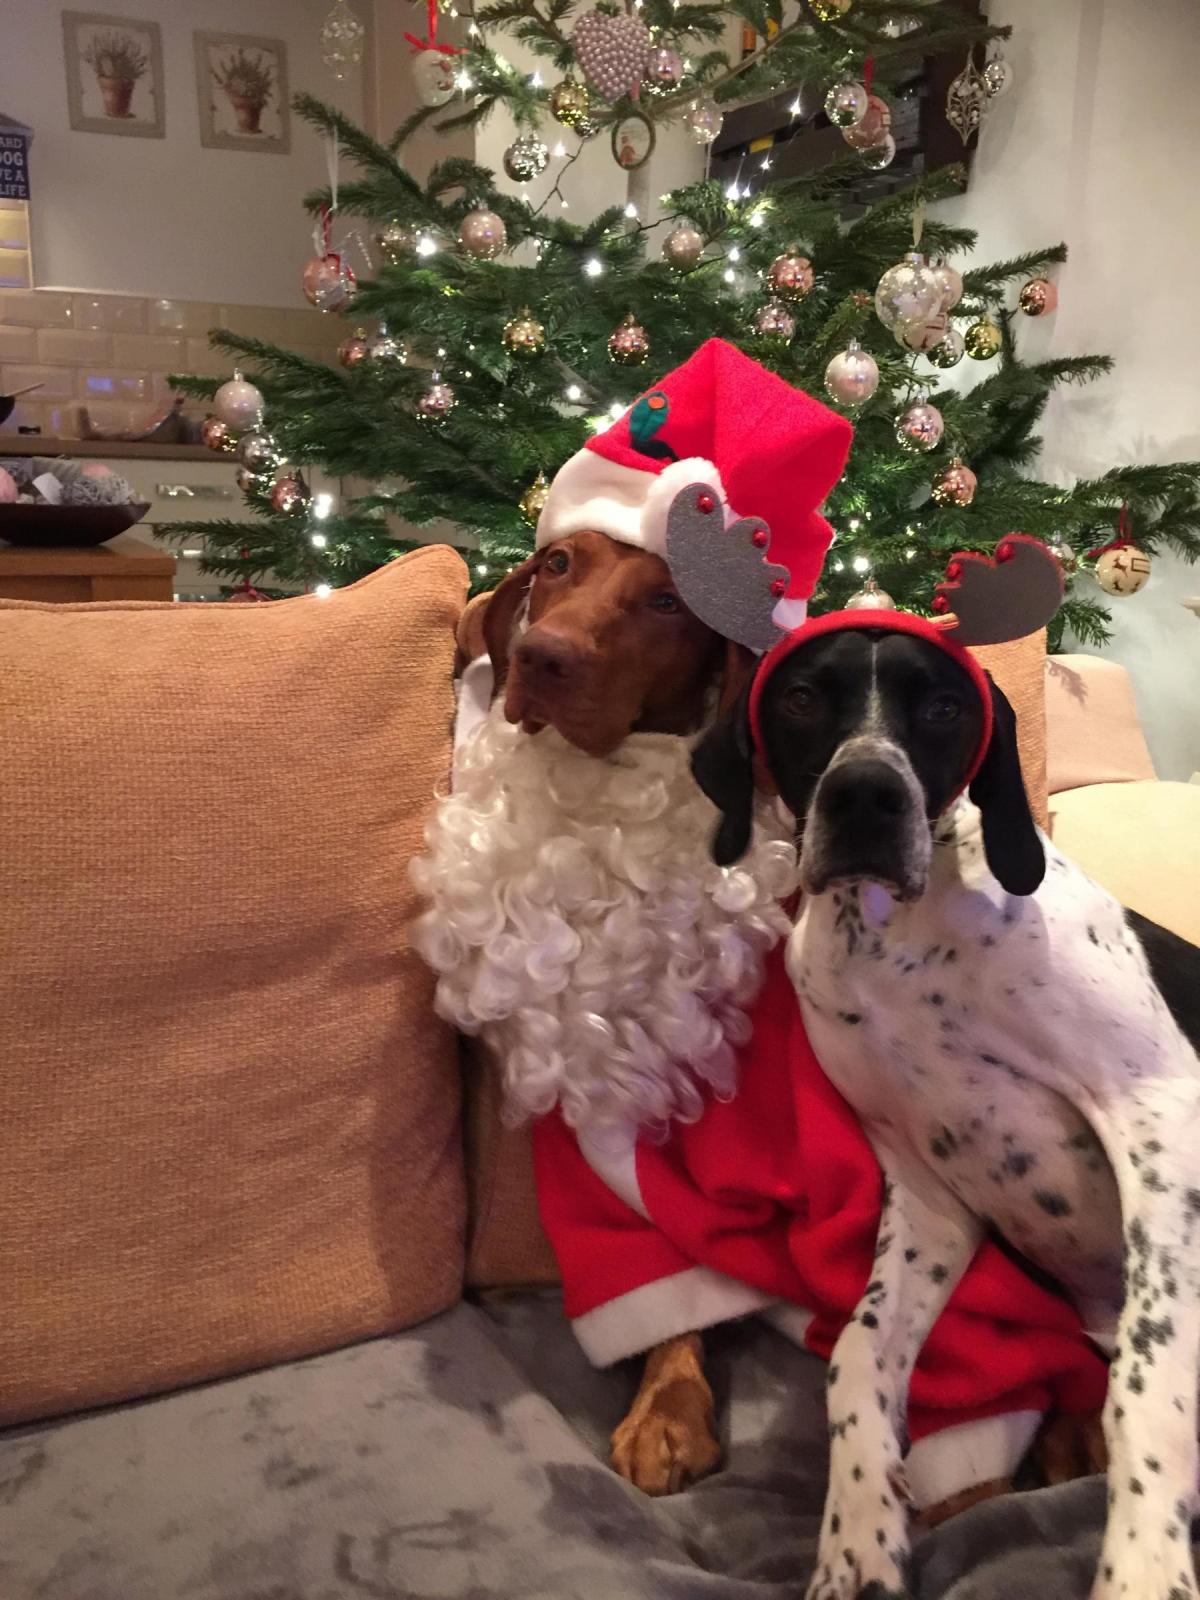 Leah Richardson from Seaham sent in this photo of her dogs Istvan and Seb.